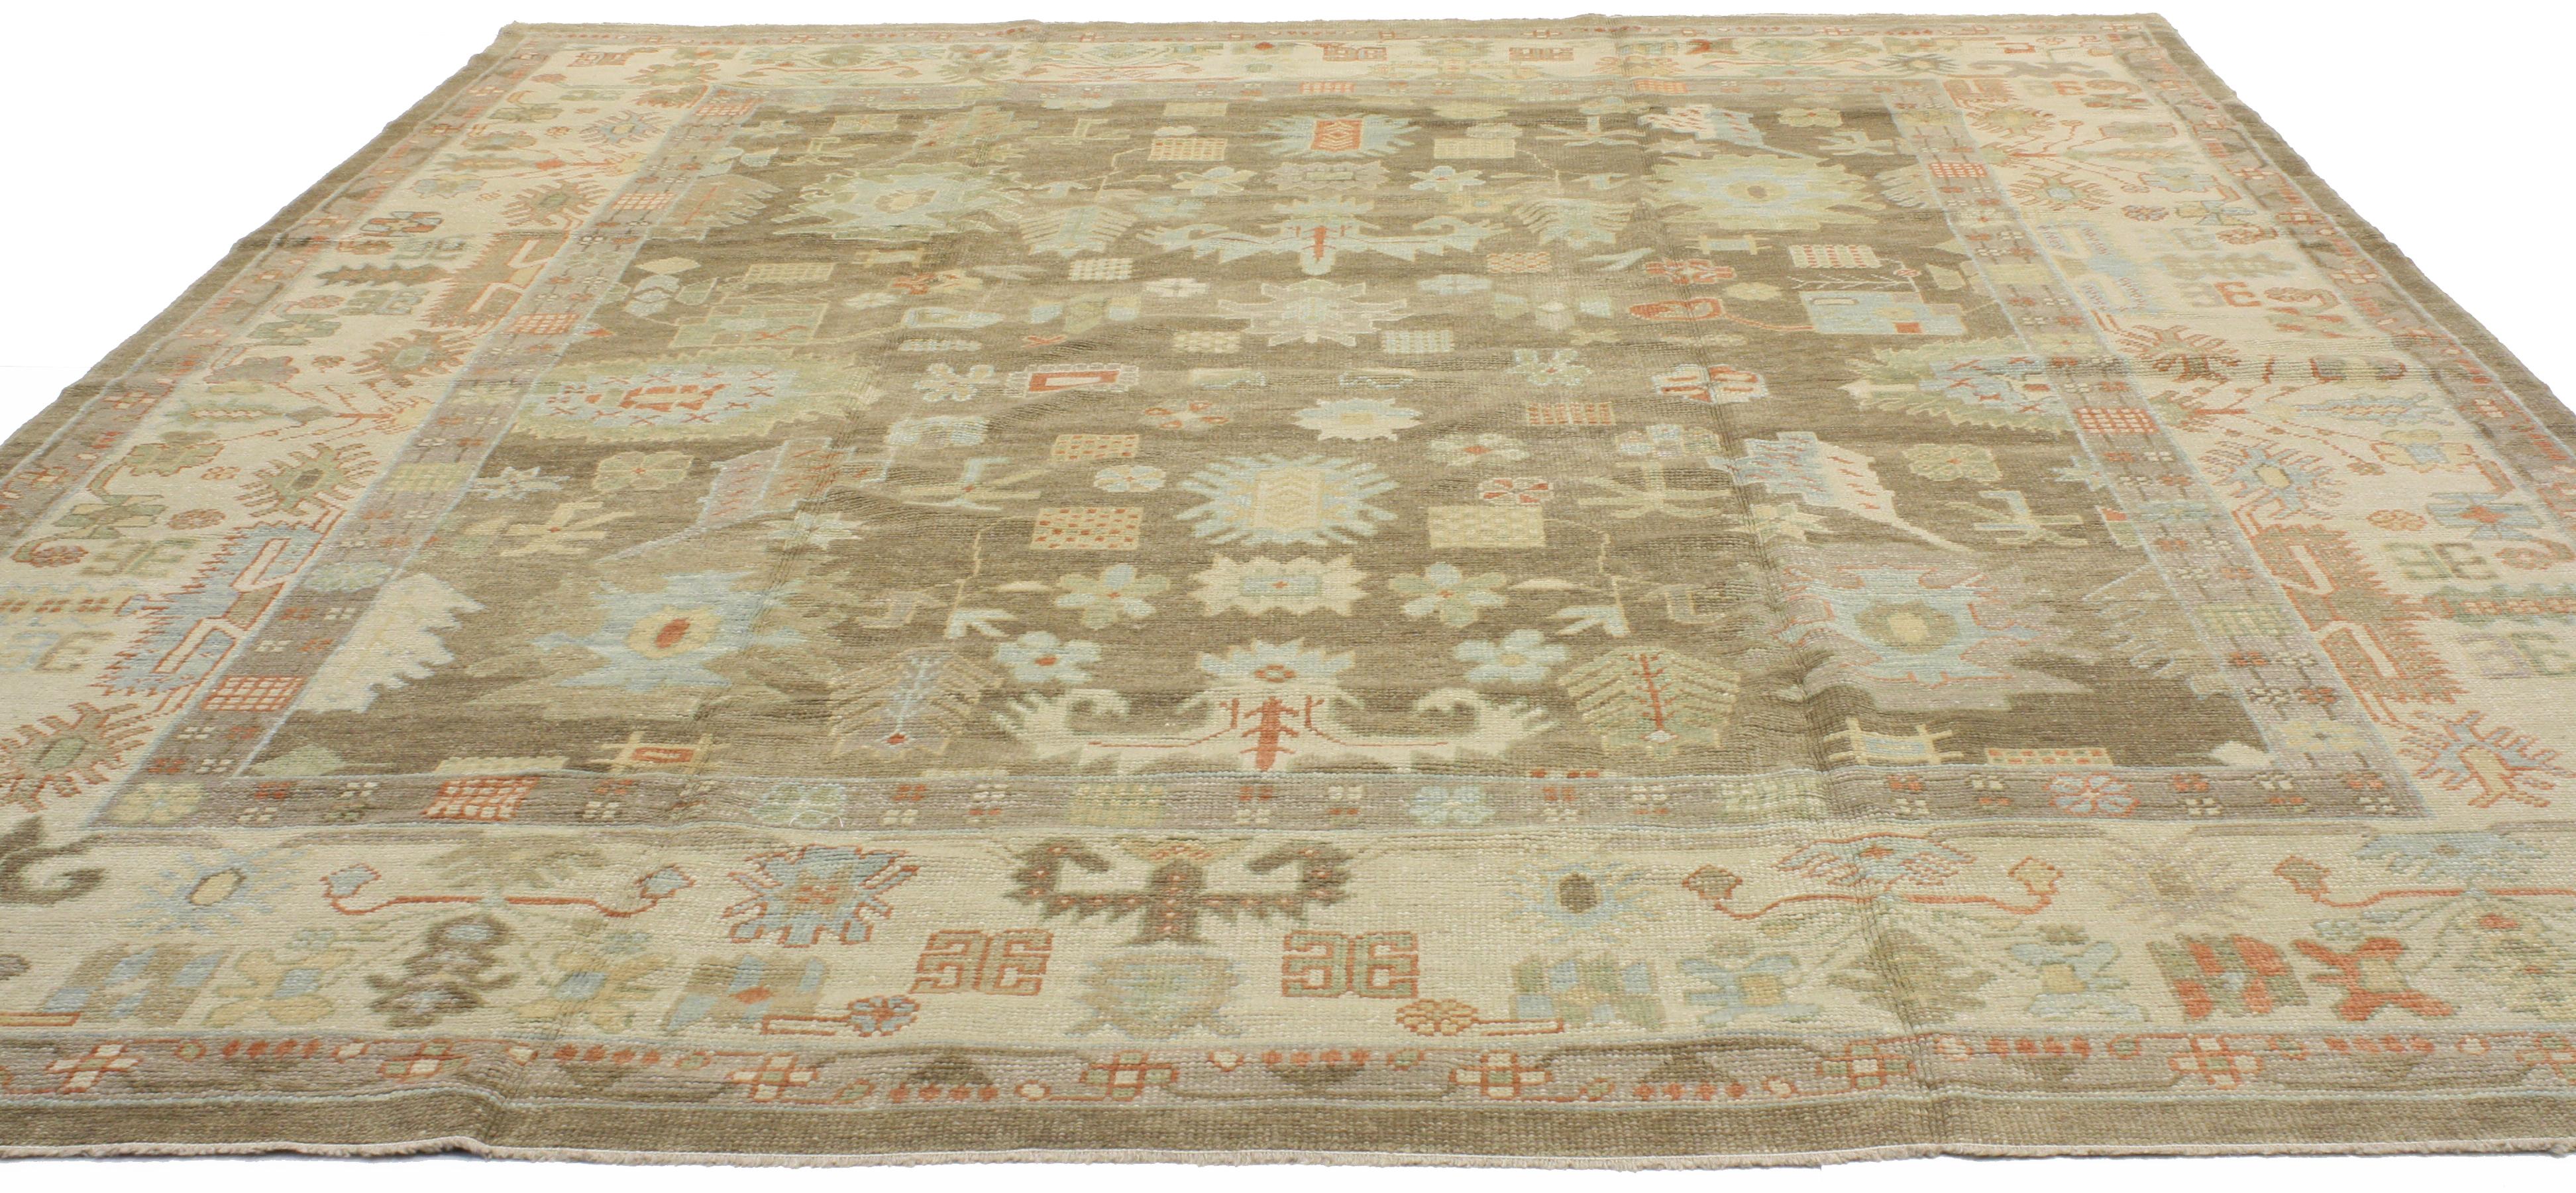 New Modern Turkish Oushak Area Rug with Transitional Style with a Pop of Color For Sale 2